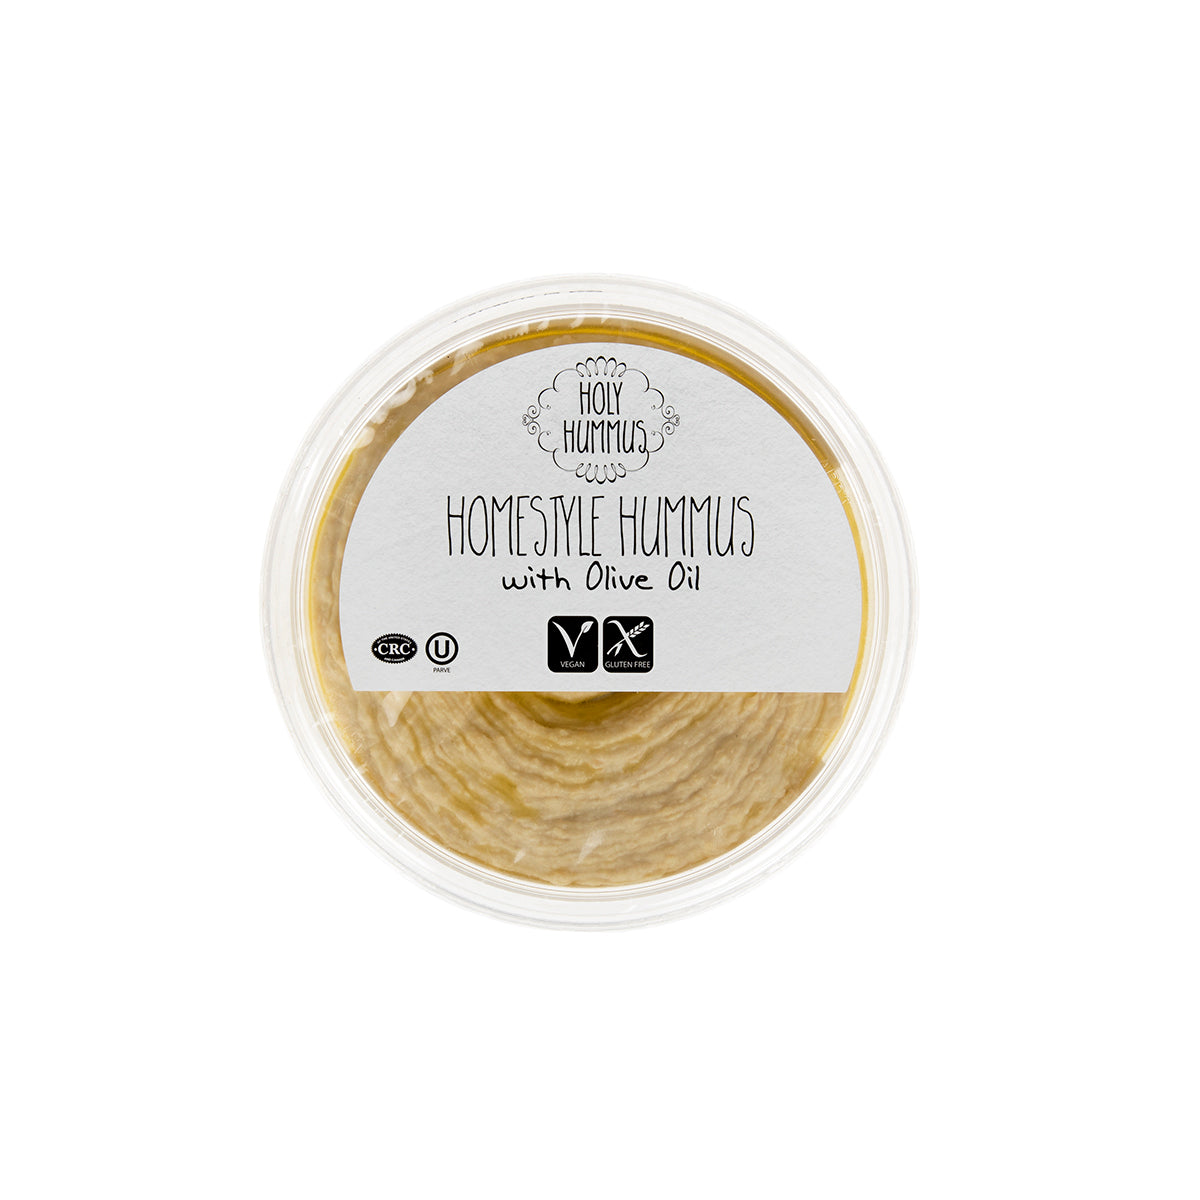 Holy Hummus Homestyle Hummus with Olive Oil 10 OZ